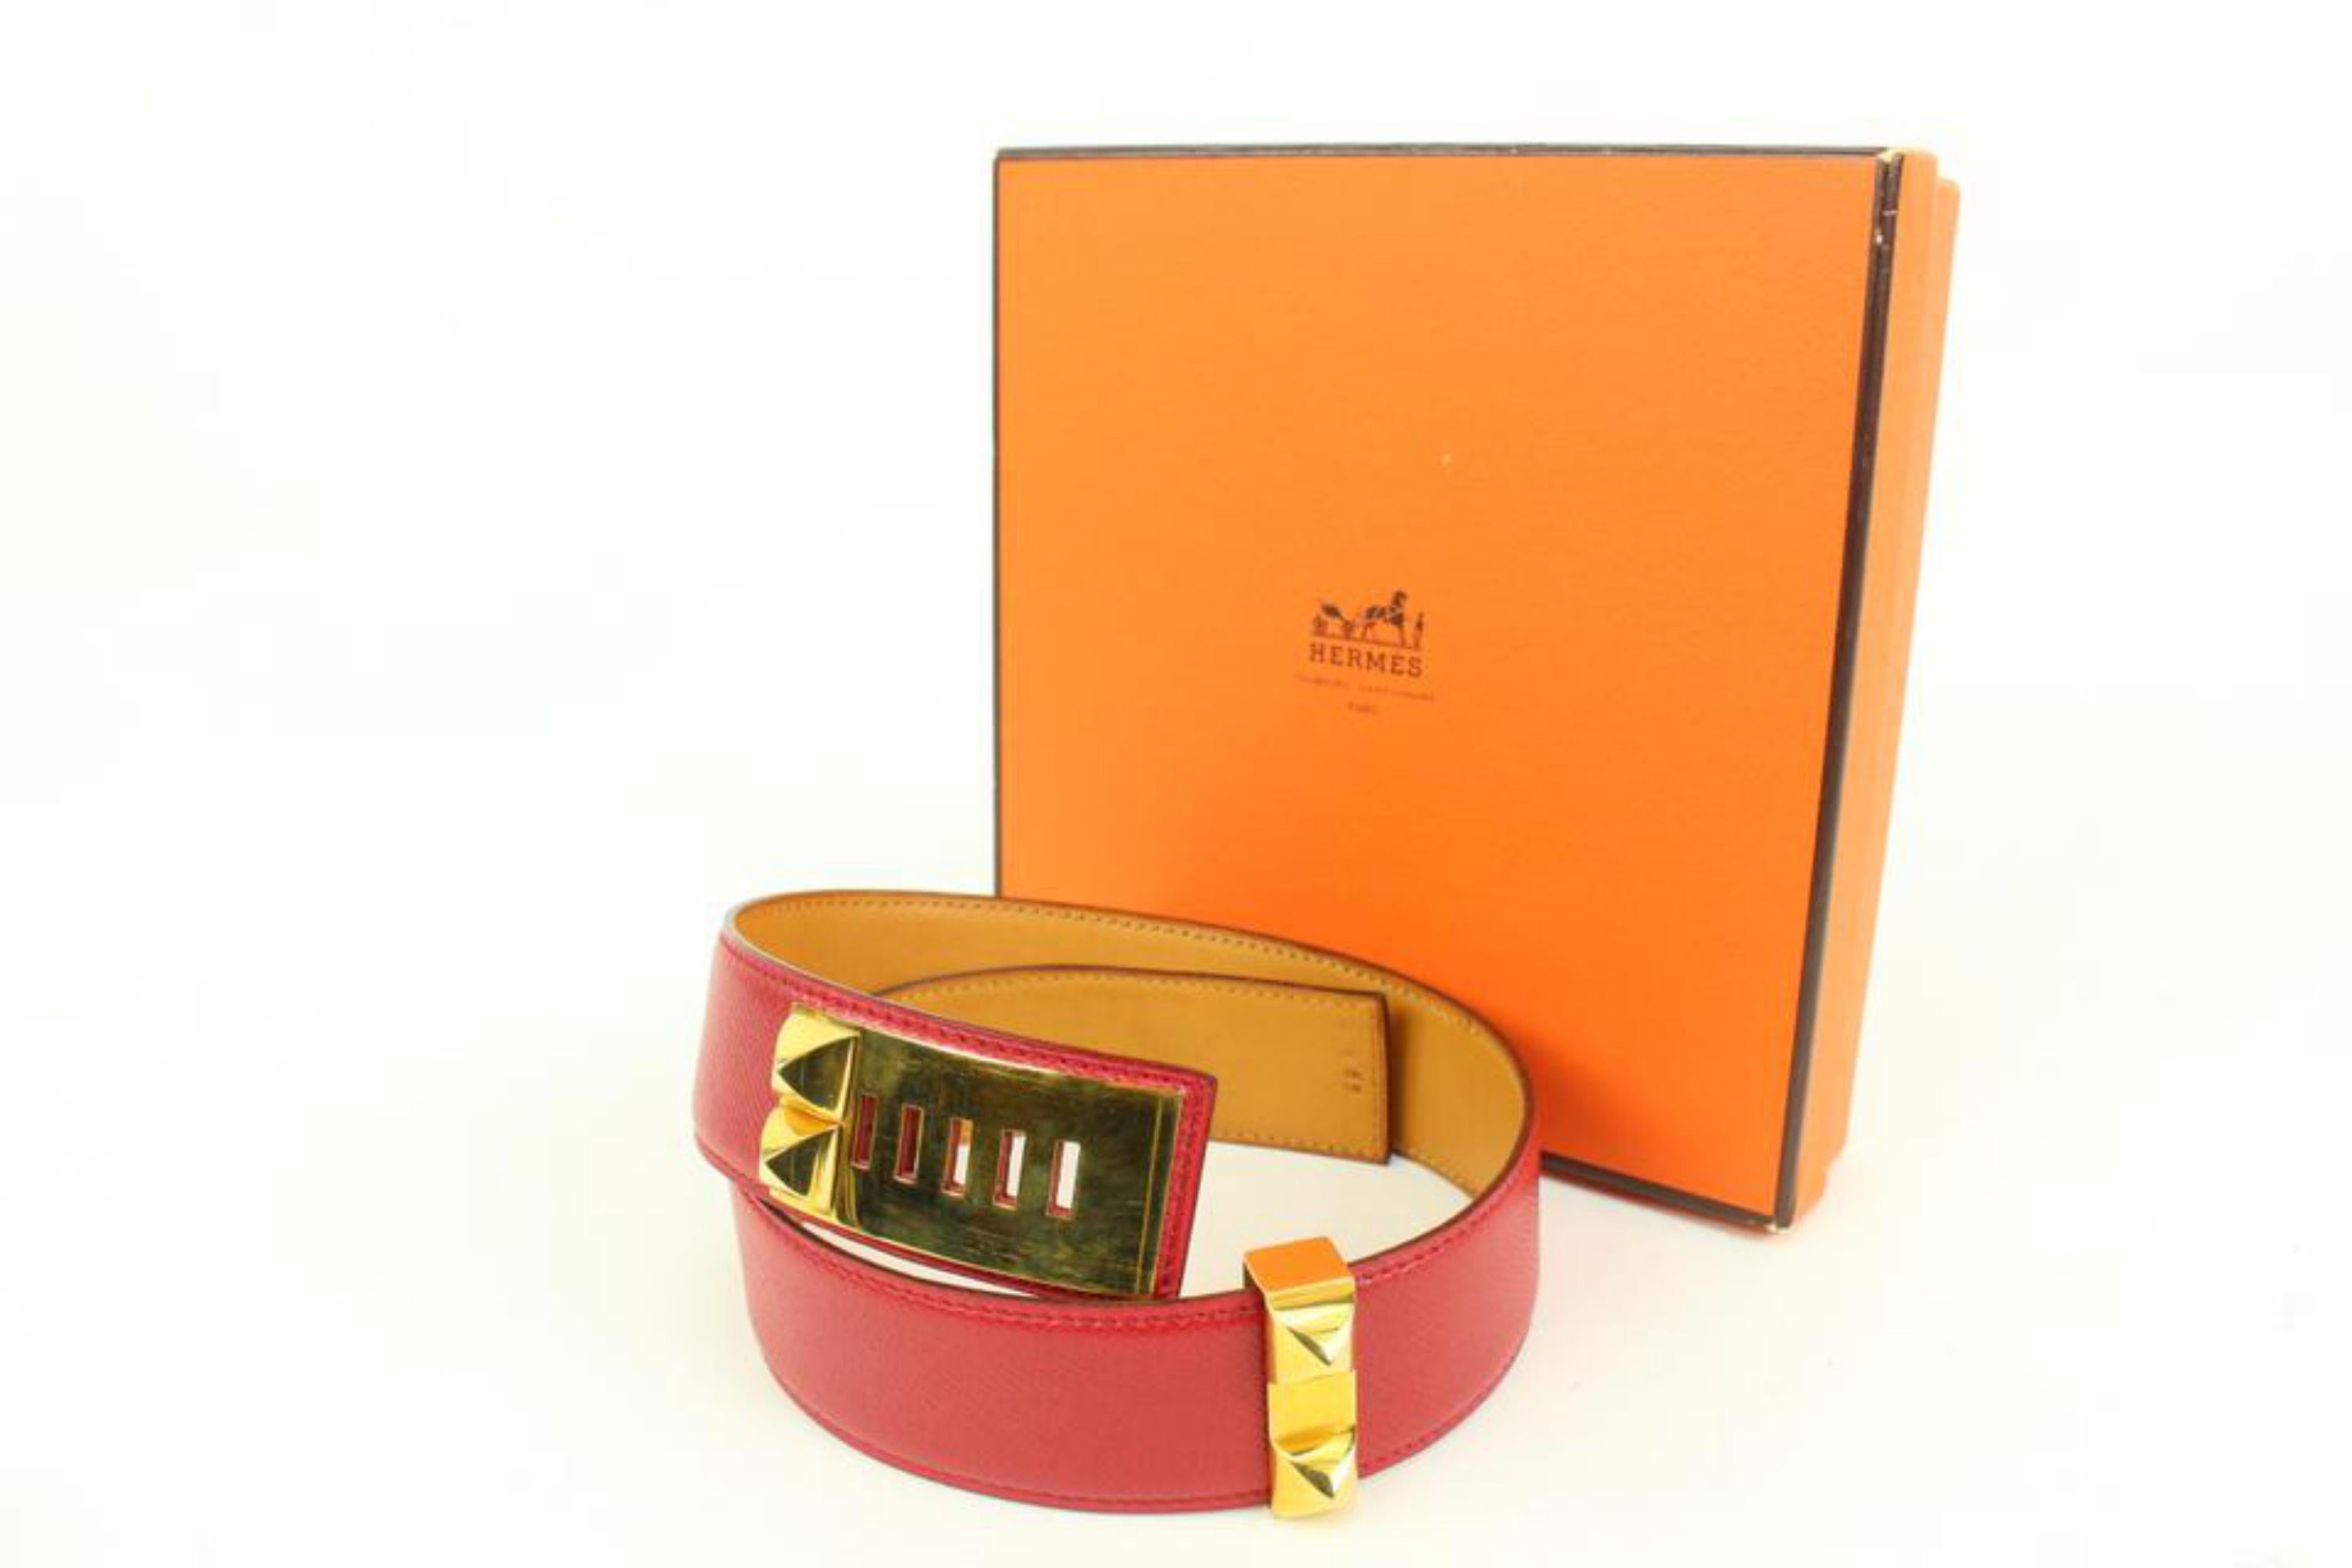 Hermès Gold Hardware Red Leather Medor CDC Belt 41h57
Date Code/Serial Number: R in a Circle
Made In: France
Measurements: Length:  28.5